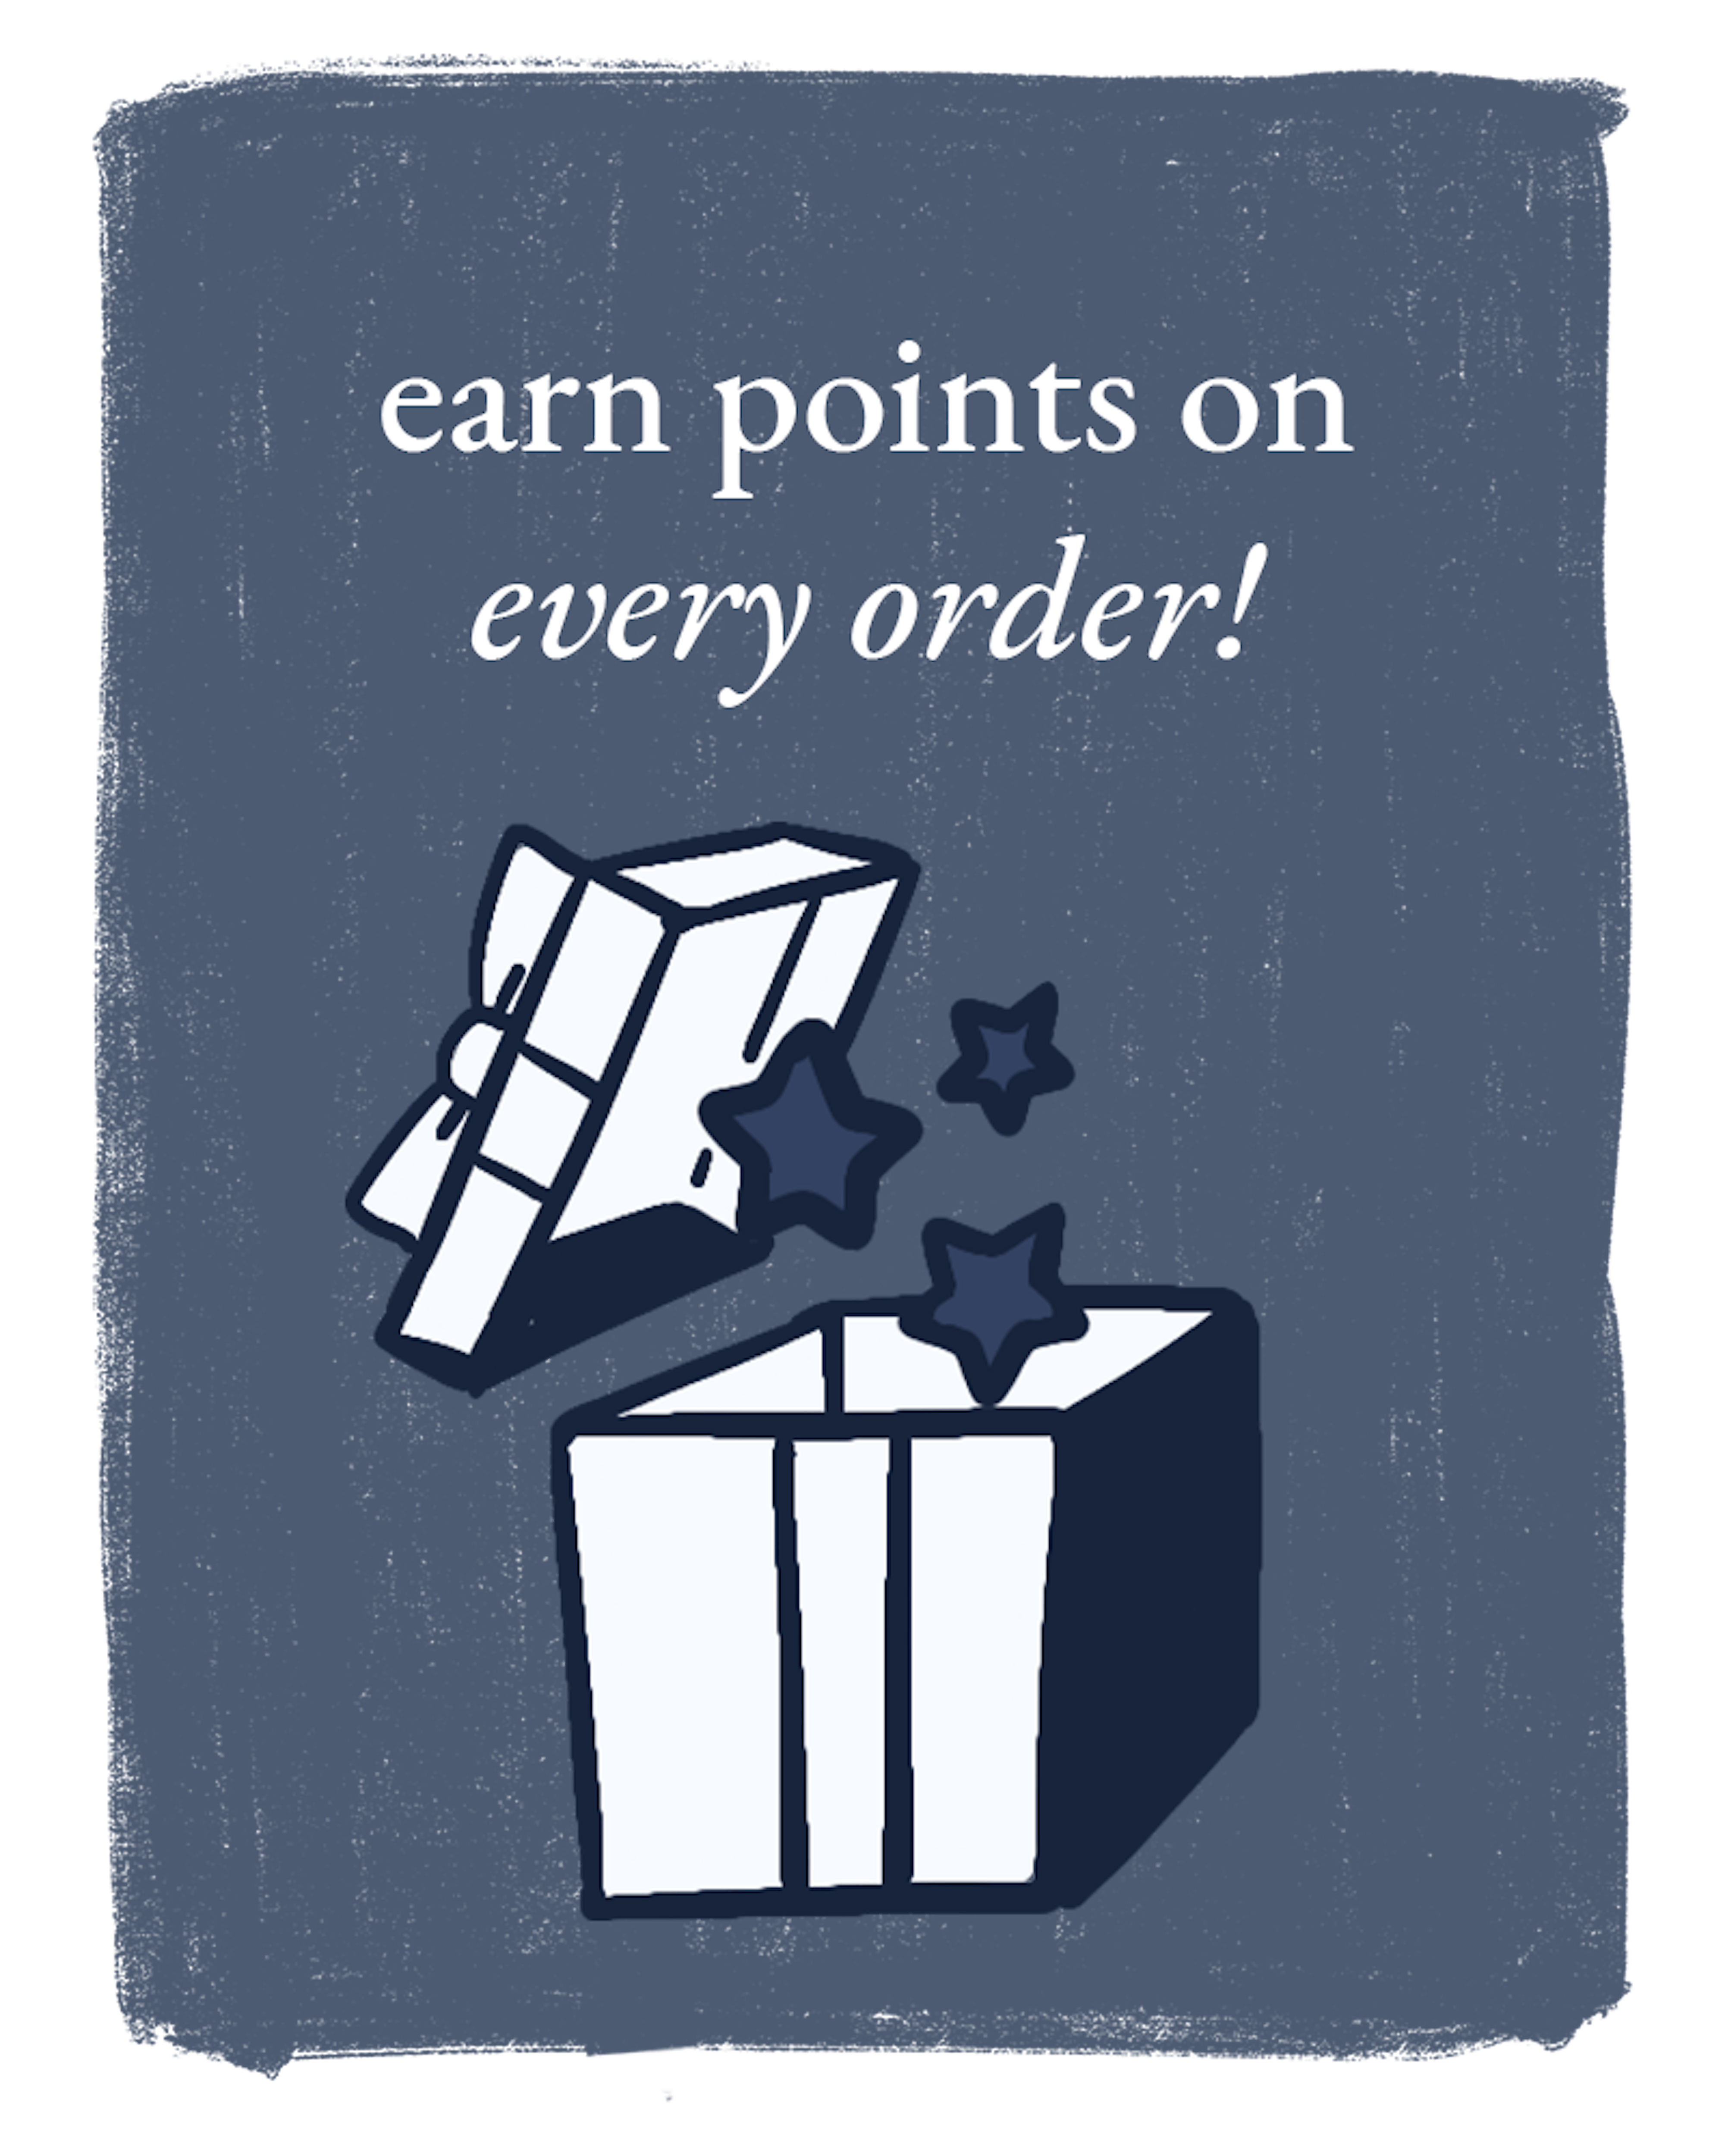 illustration of a present with text that says "earn points on every order"